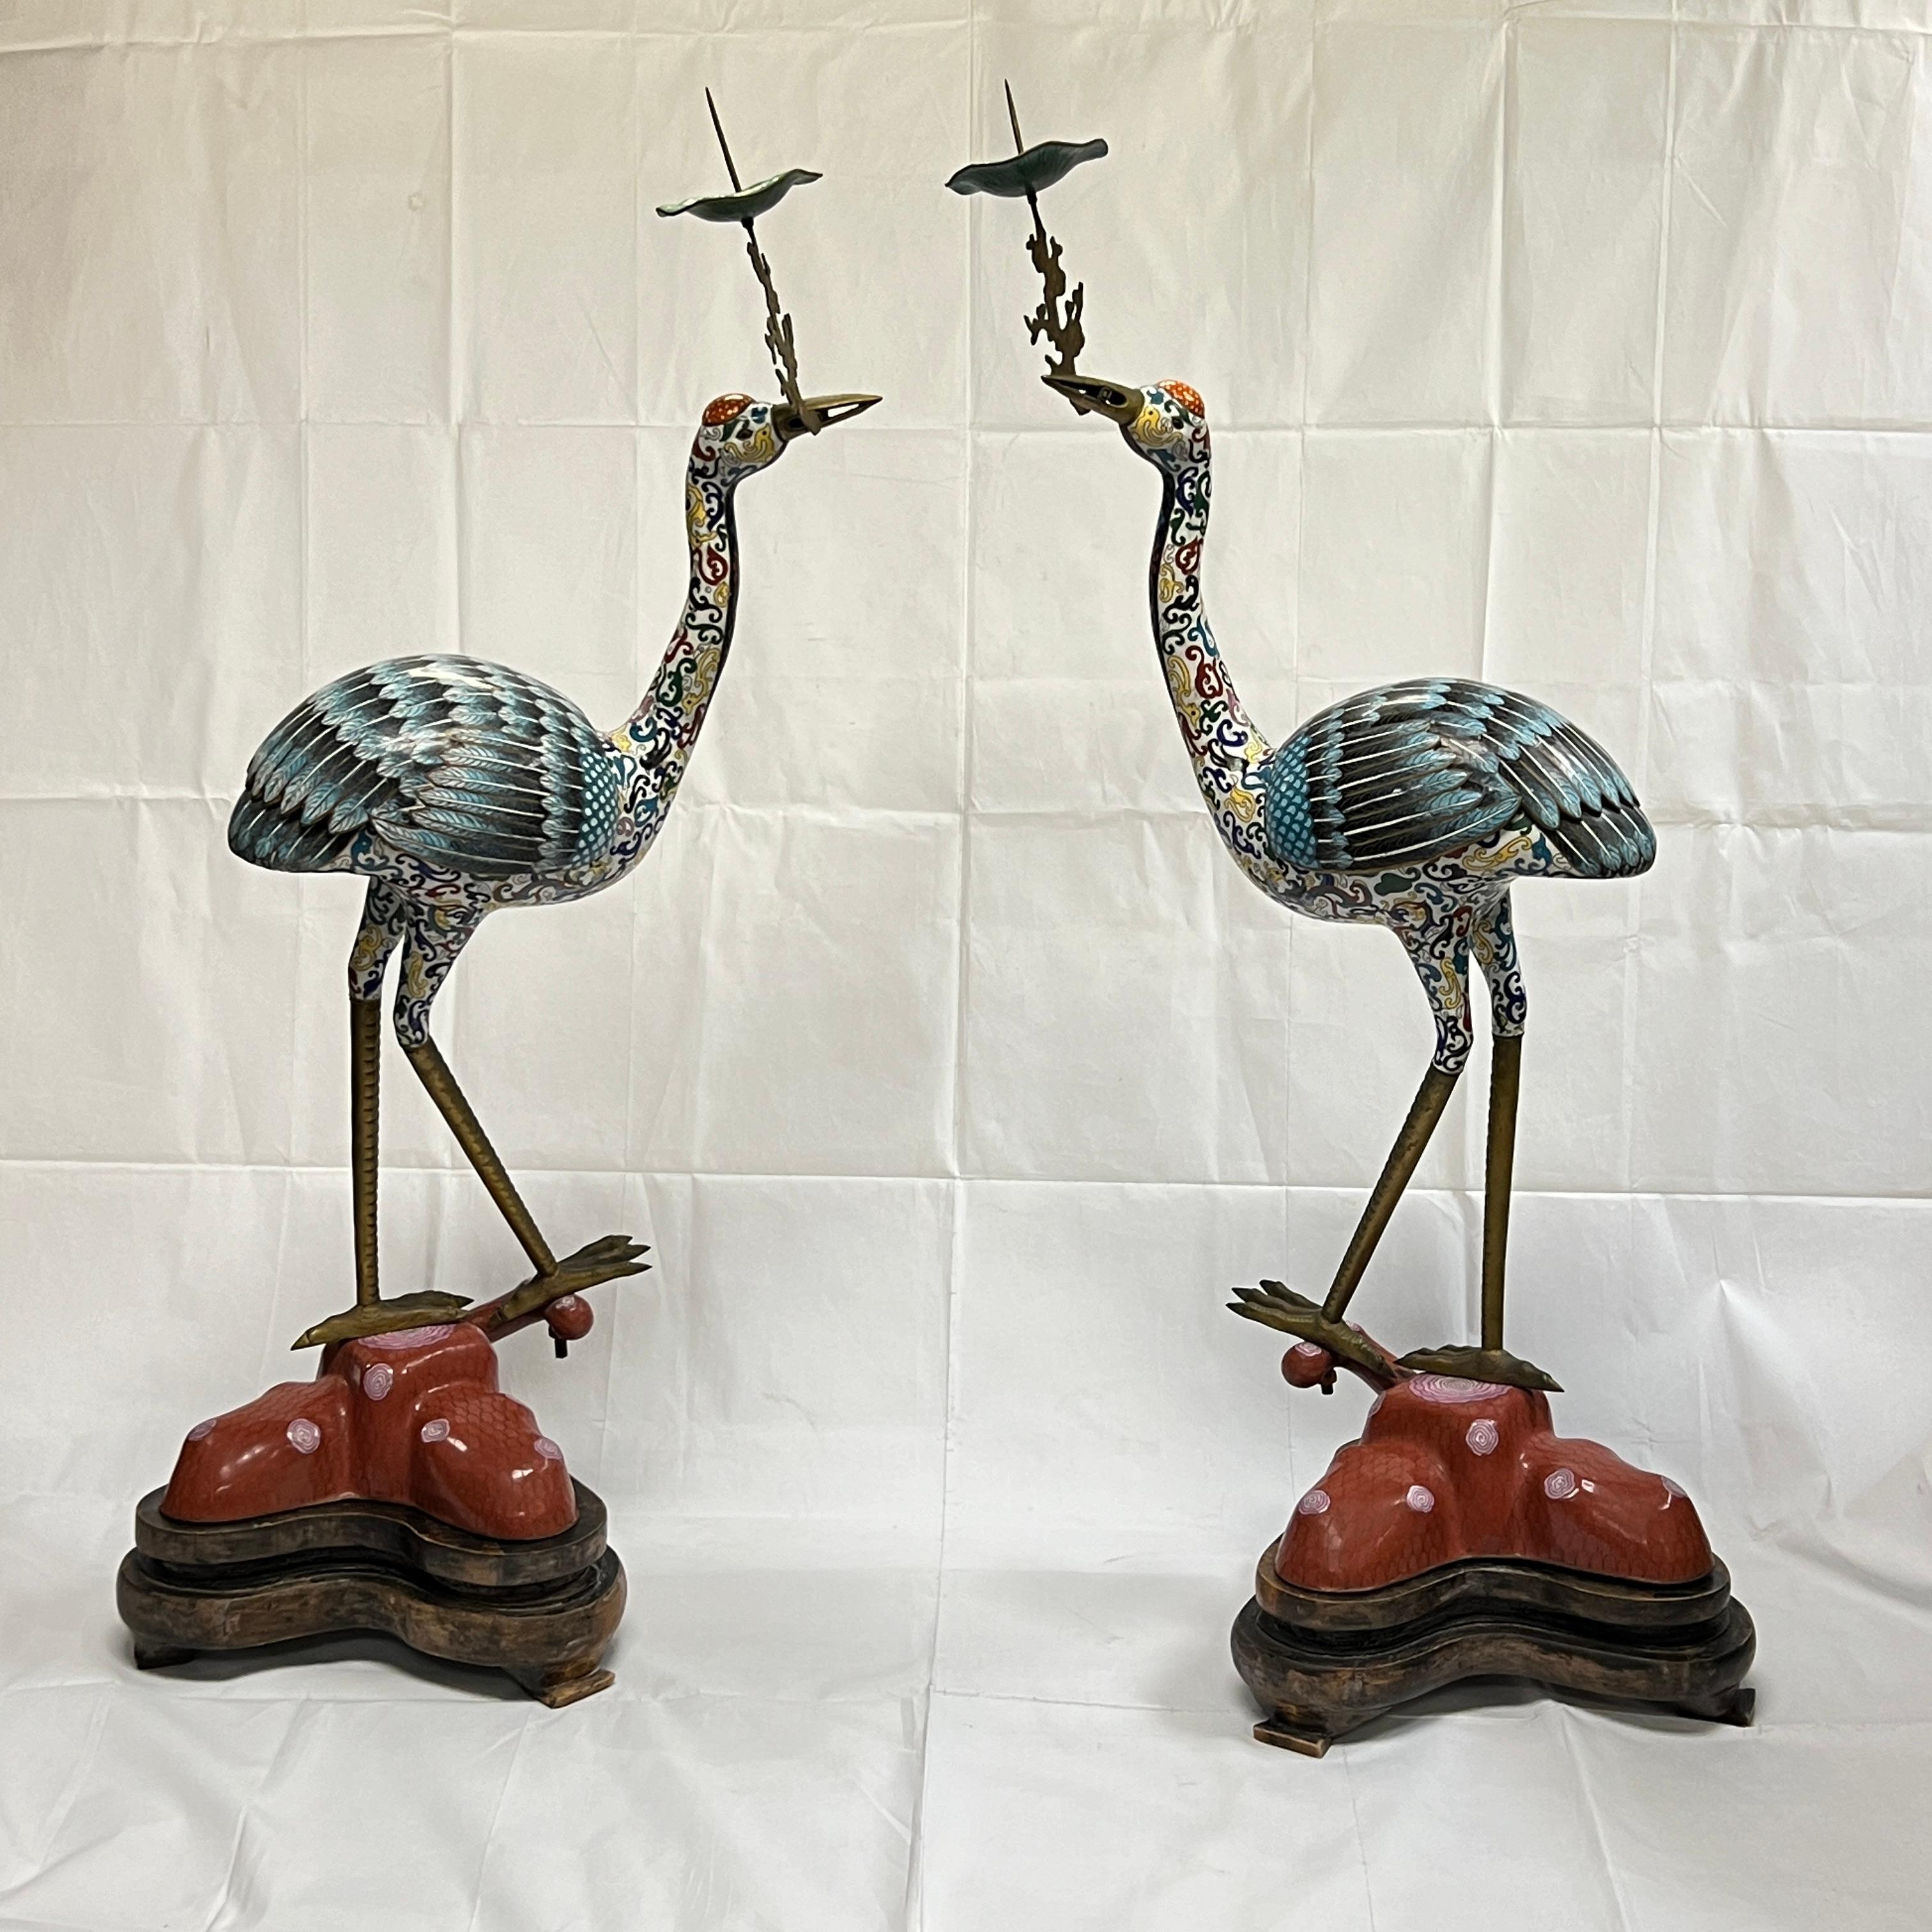 Pair of very large antique Chinese cloisonne enamel candle holders fashioned as standing cranes holding prunus branch and lotus leaf in their mouths, and resting on carved wooden stands.